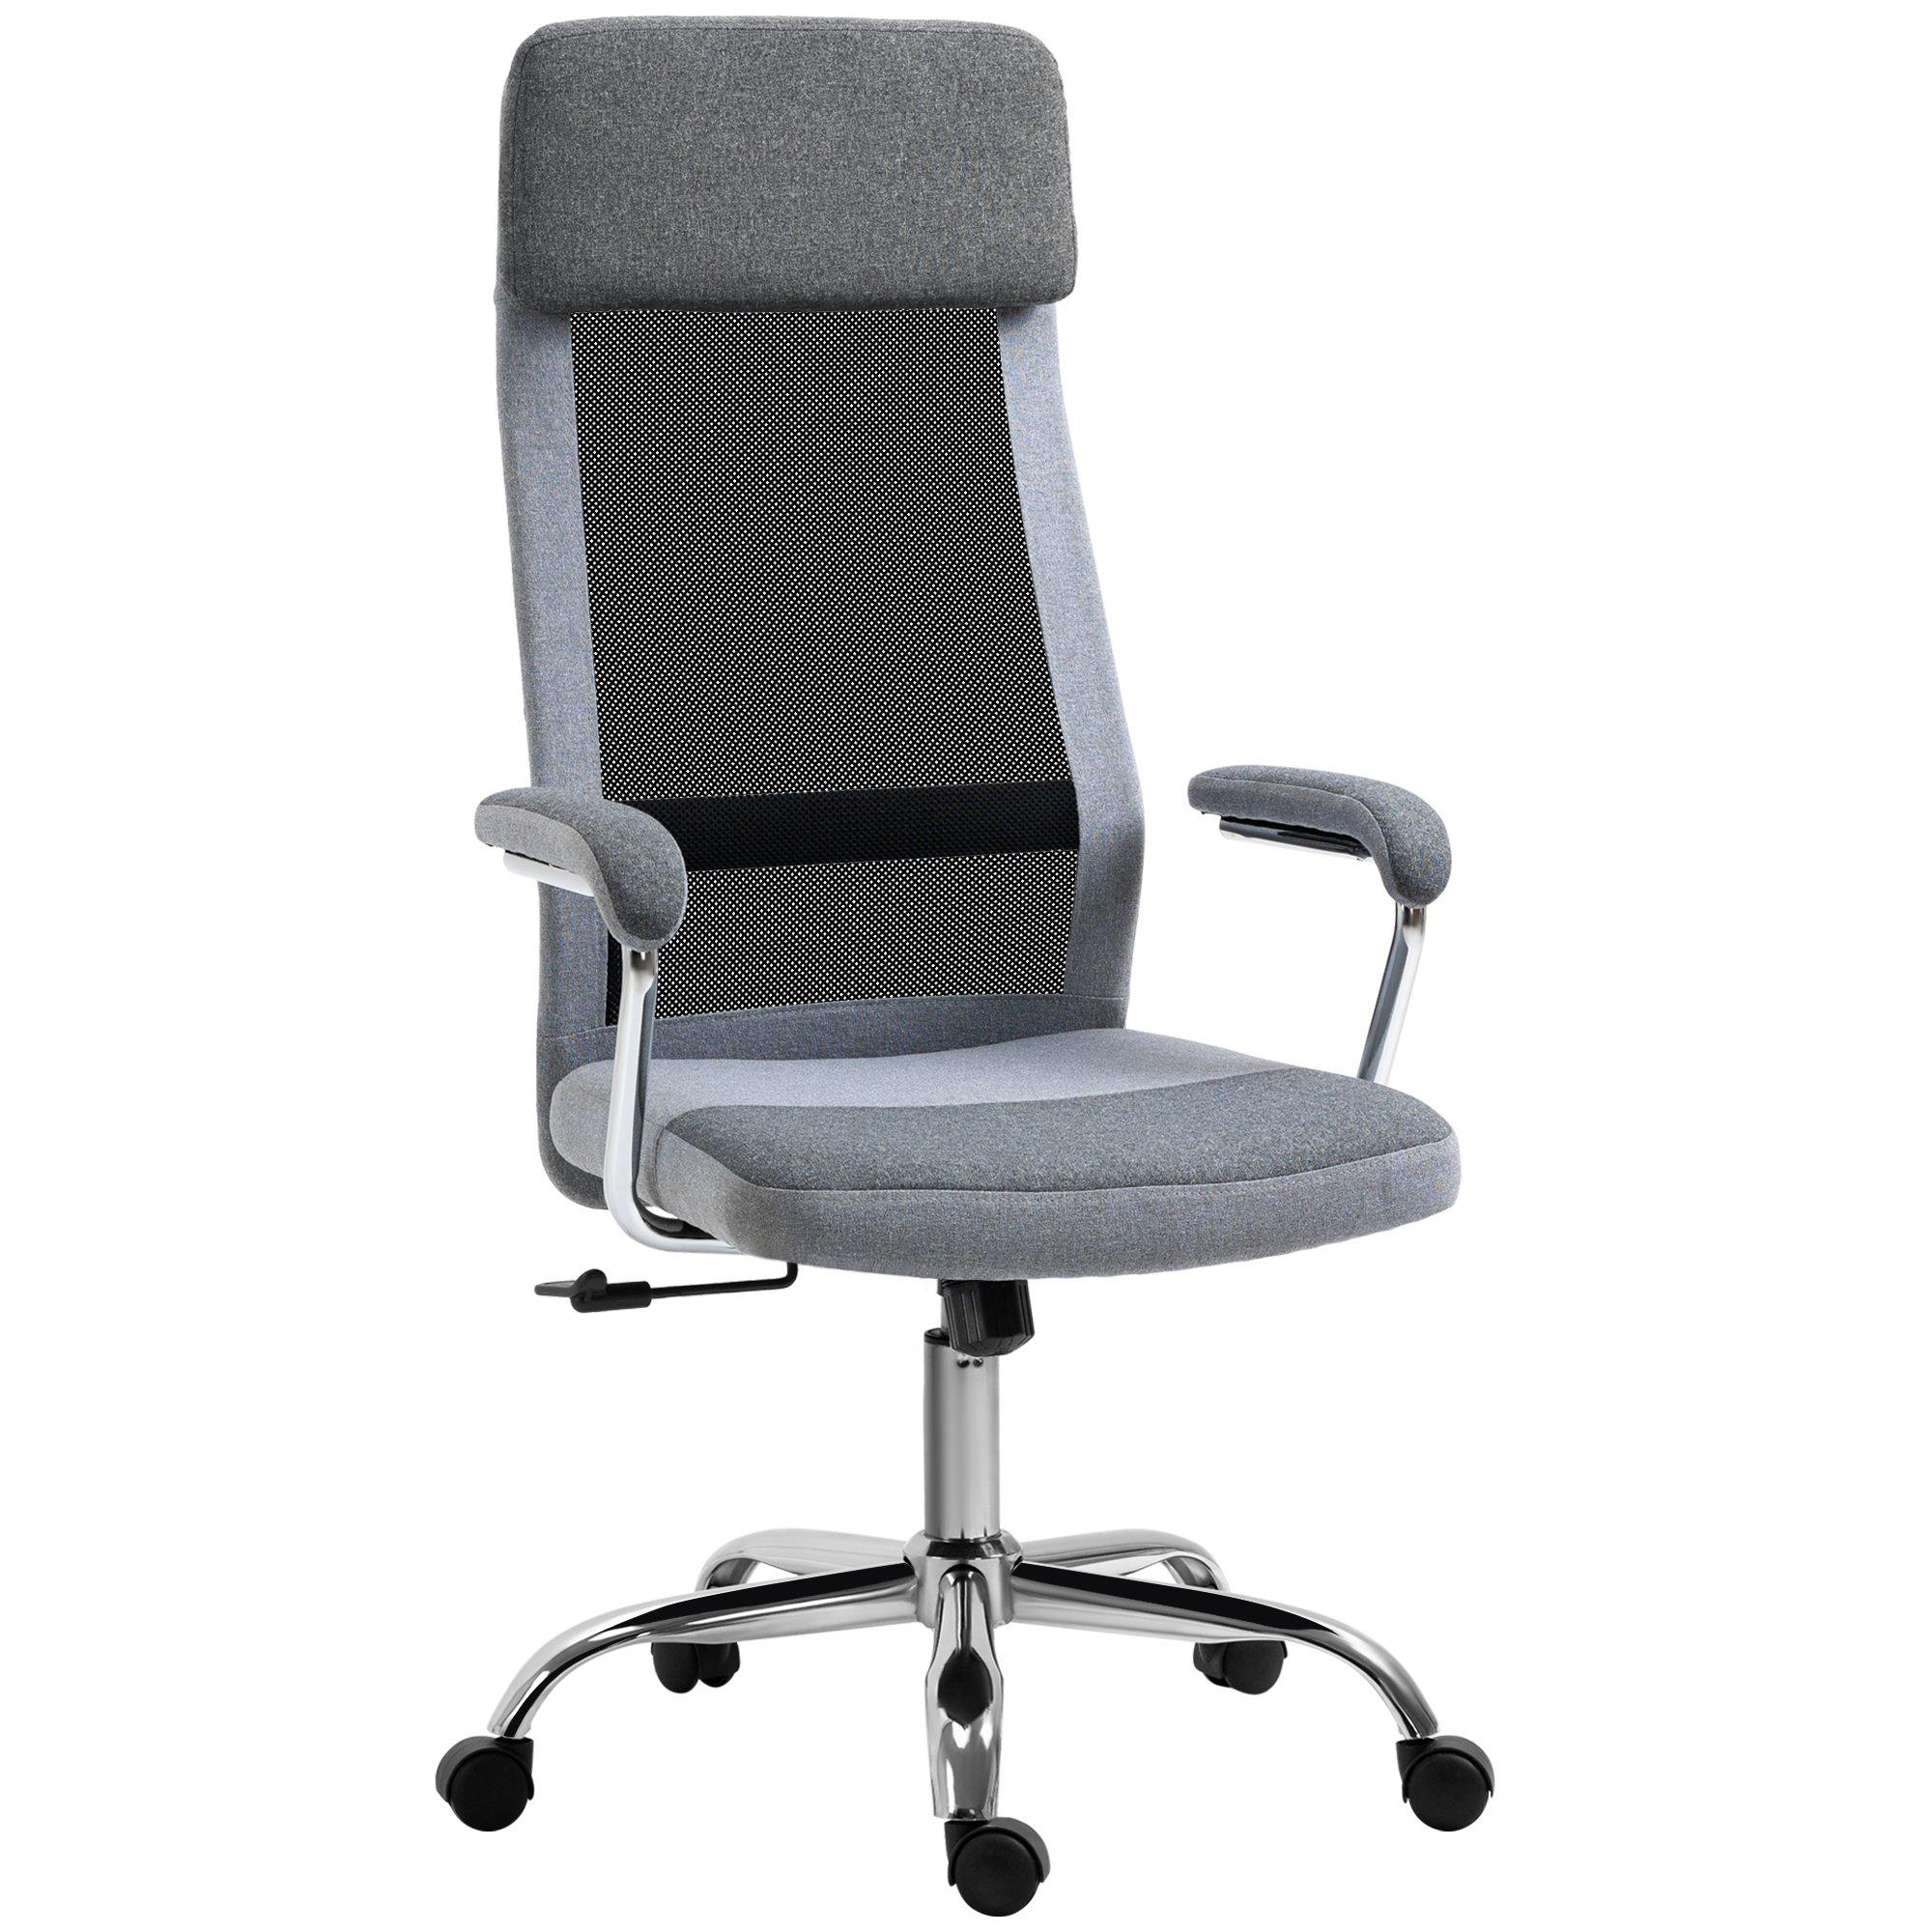 Office Chair Mesh High Back Swivel Task PC Desk Chair Home and Arm